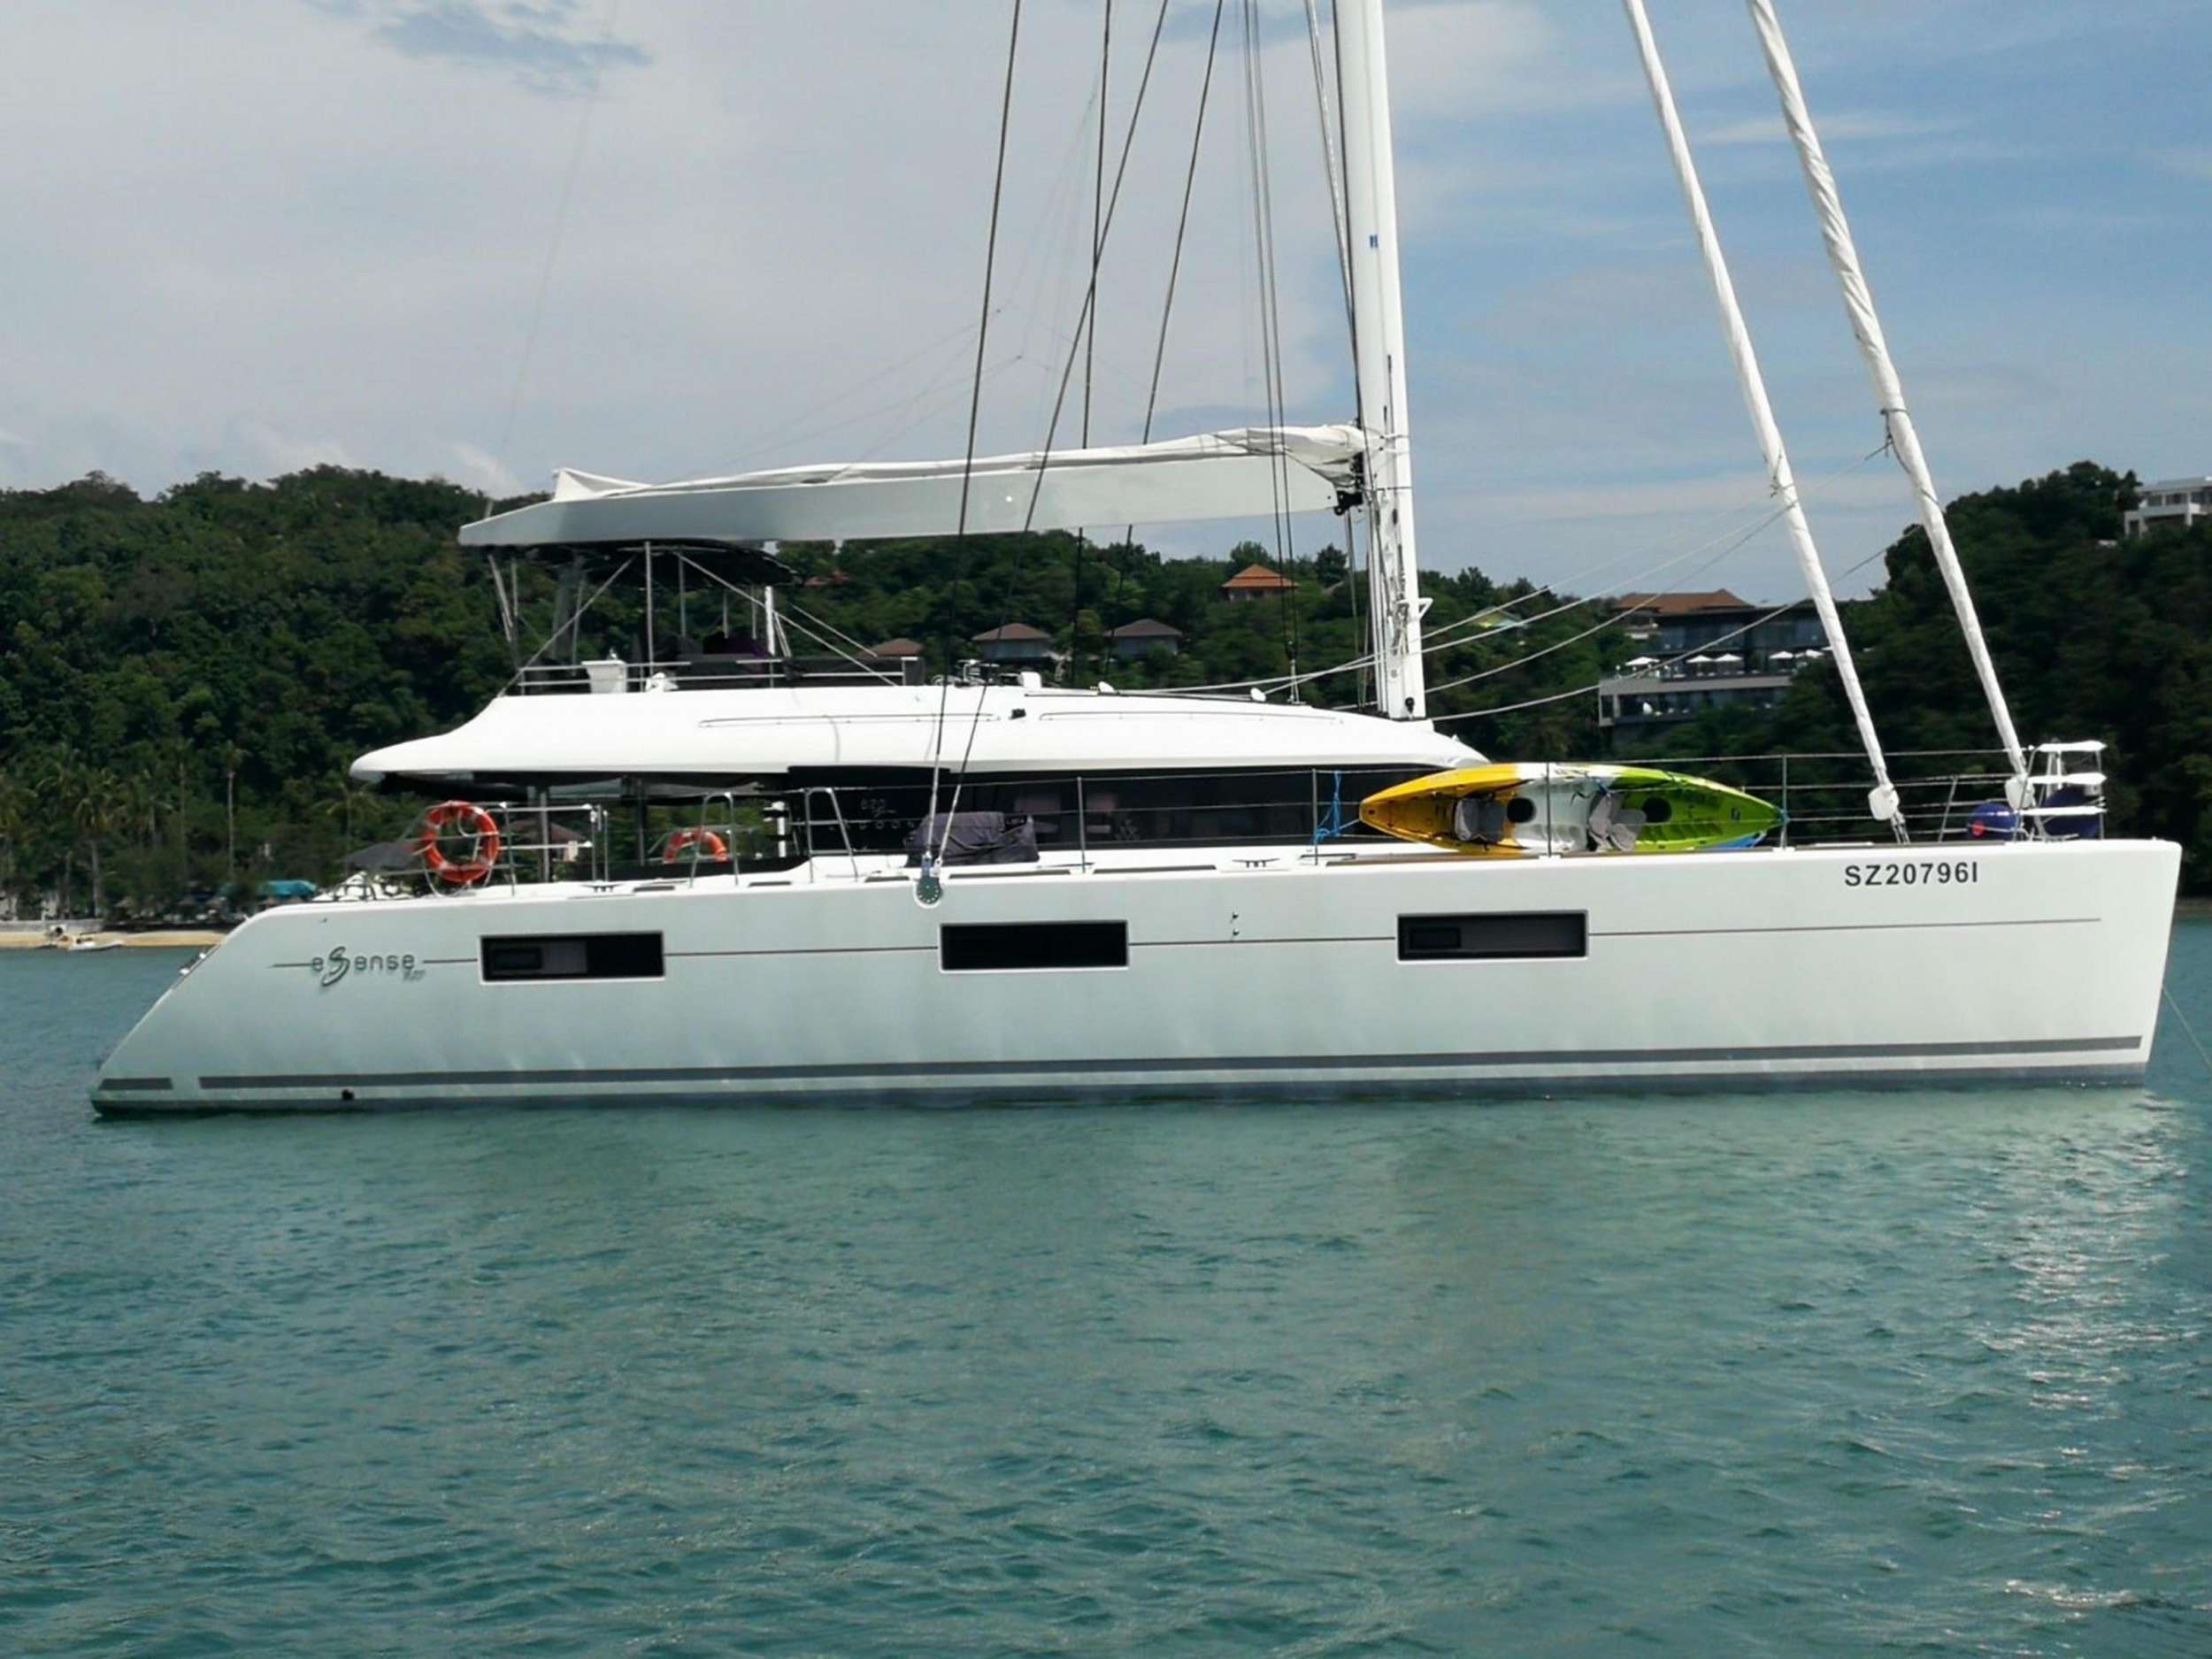 Six Degrees - Yacht Charter Philippines & Boat hire in SE Asia 1